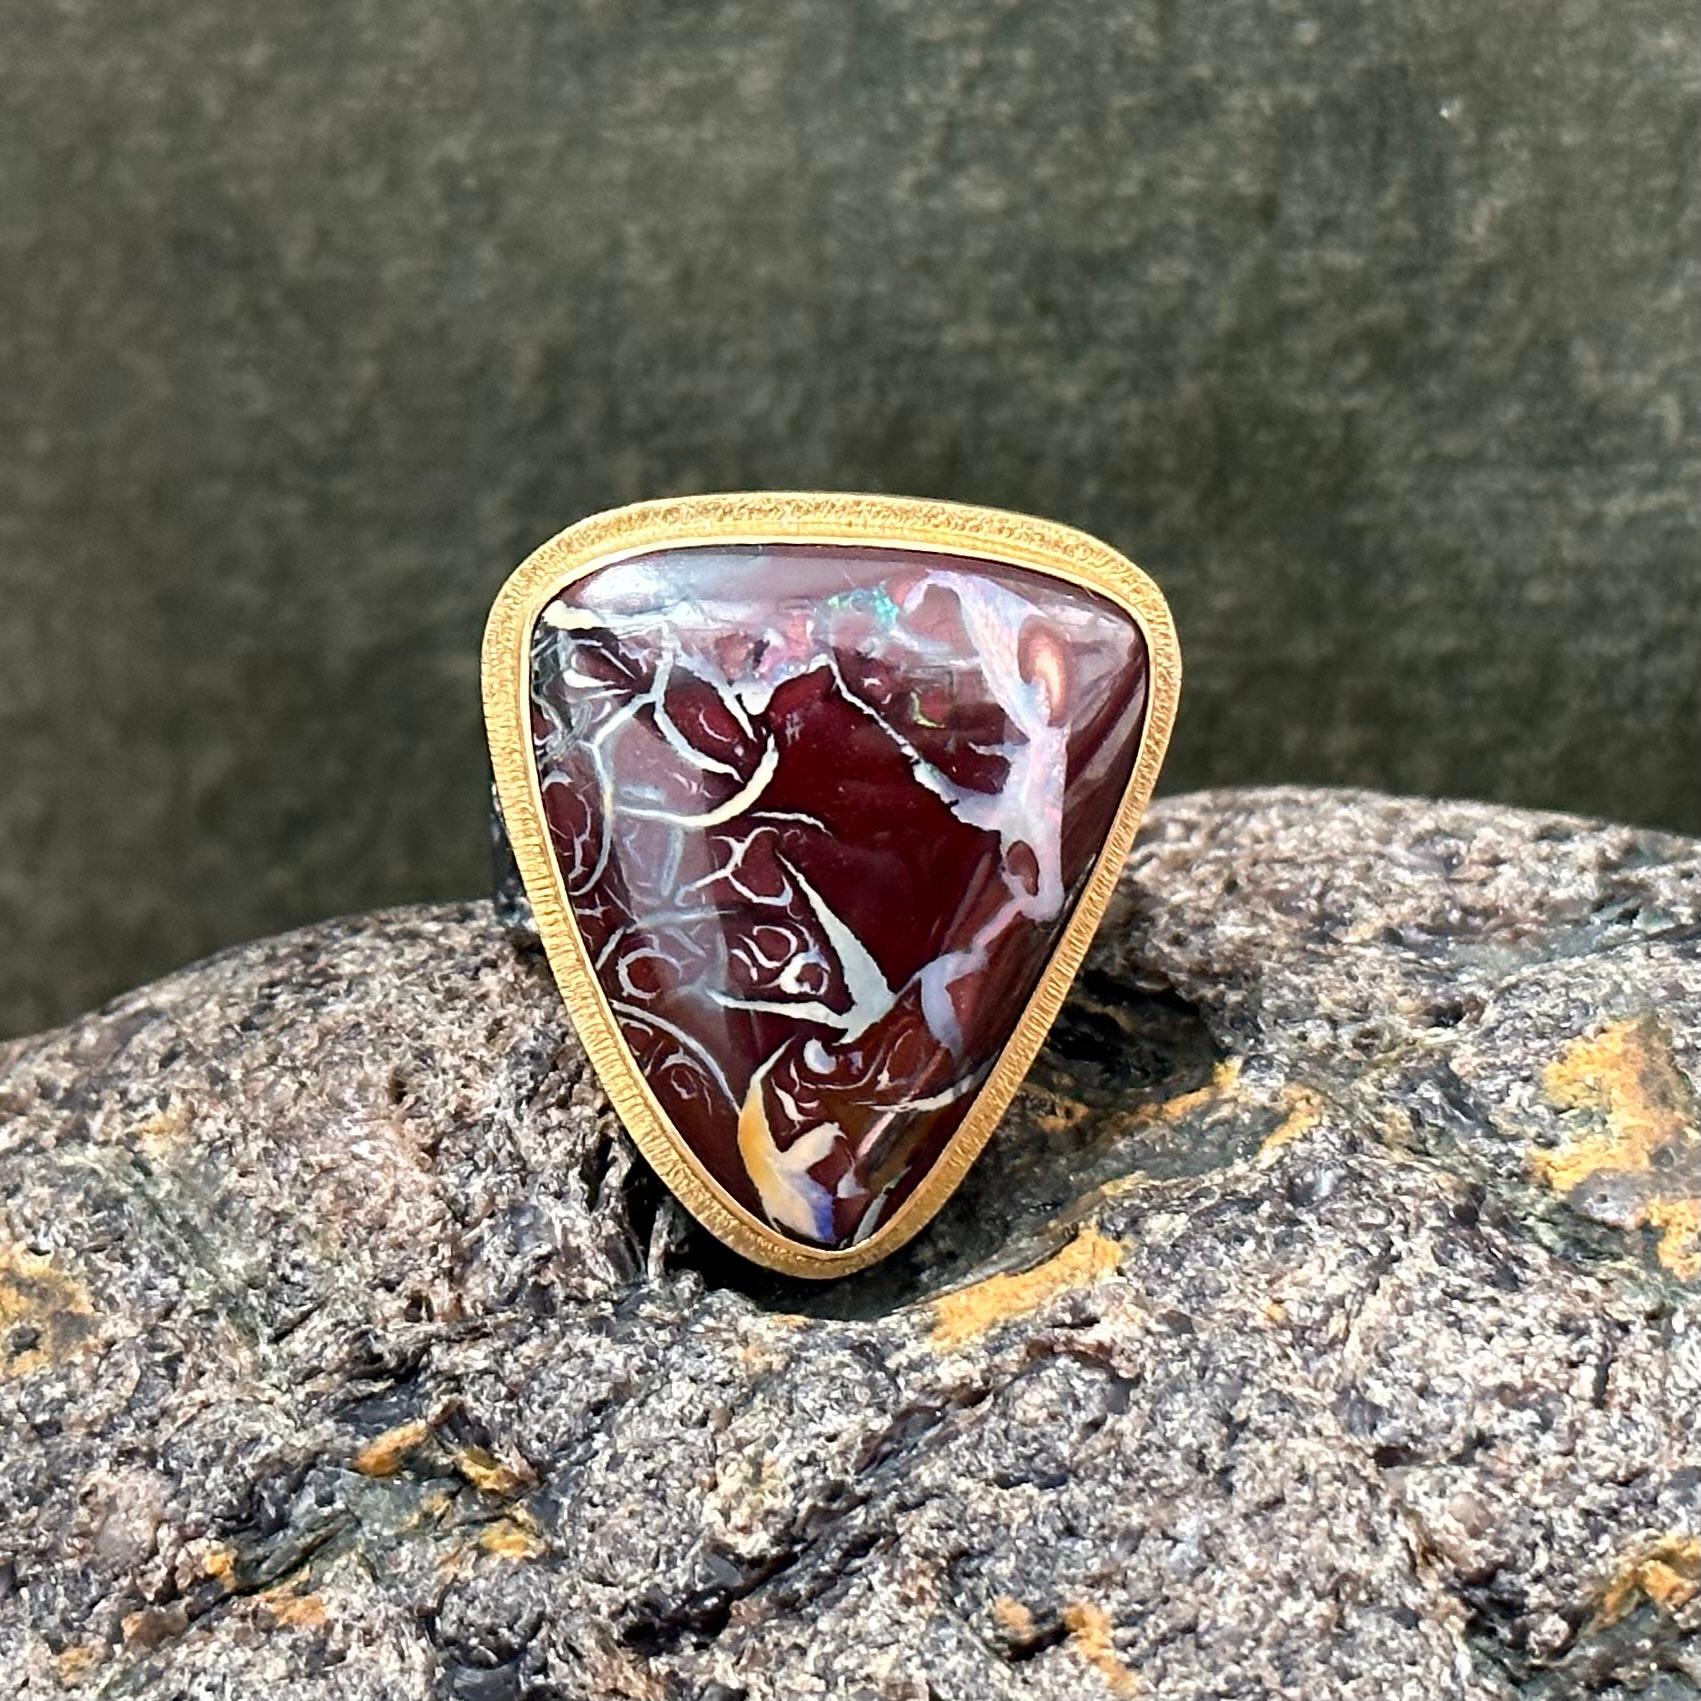 A fascinatingly unique 21 x 25 mm trillium cabochon of Australian Koroit Boulder Opal is highlighted with an 18K gold bezel surrounded by a line textured double bezel atop a comfortable flattish organically textured contrasting dark oxidized